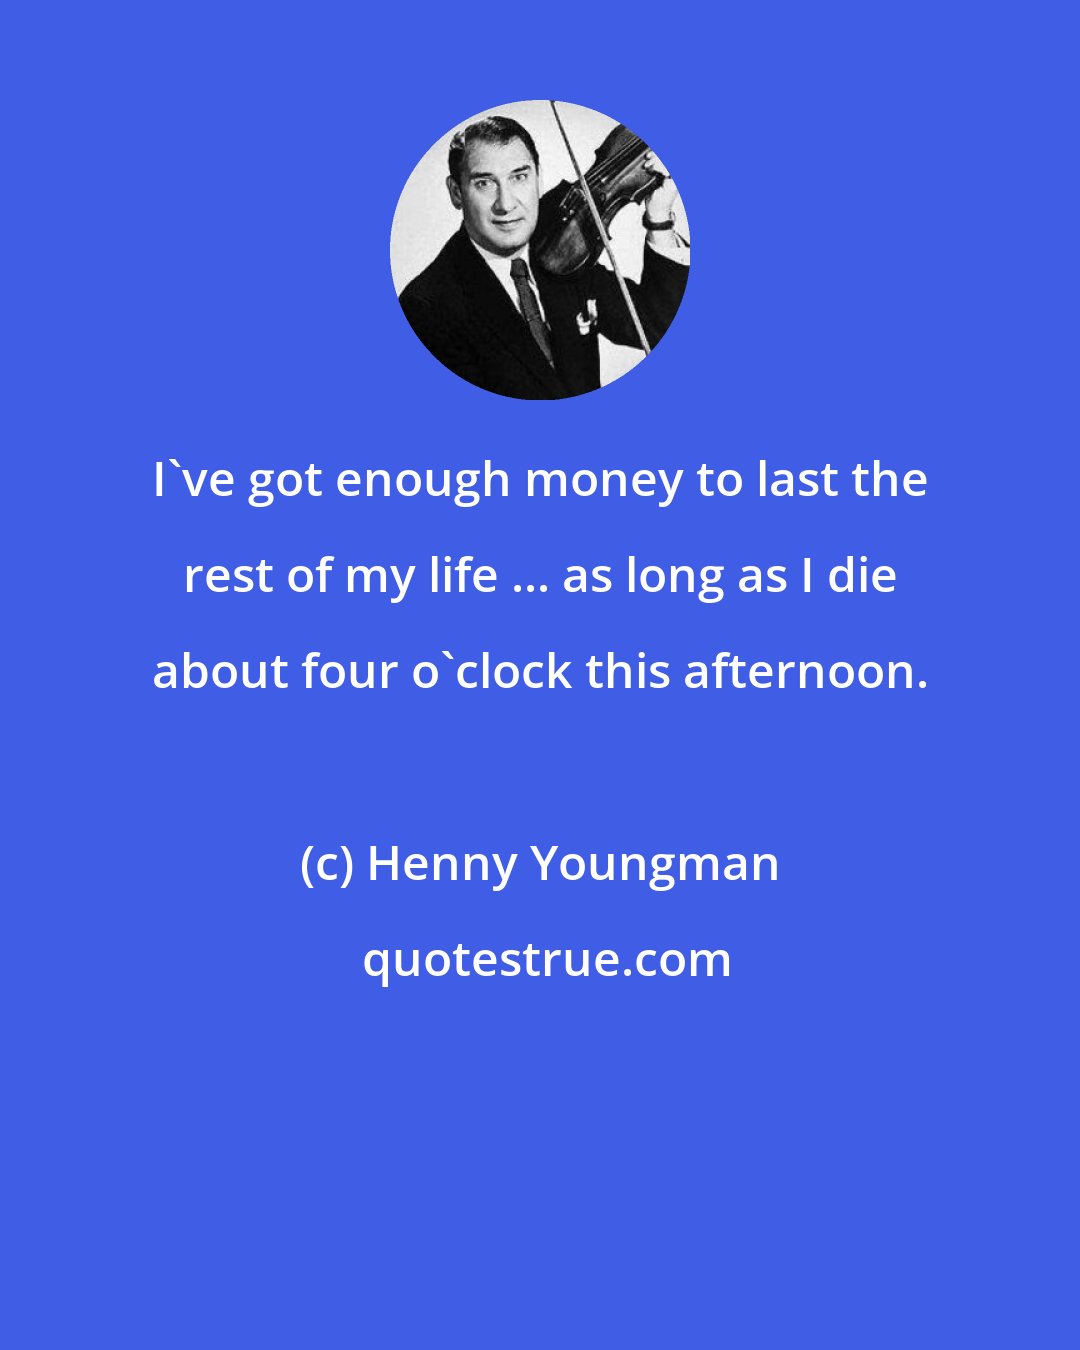 Henny Youngman: I've got enough money to last the rest of my life ... as long as I die about four o'clock this afternoon.